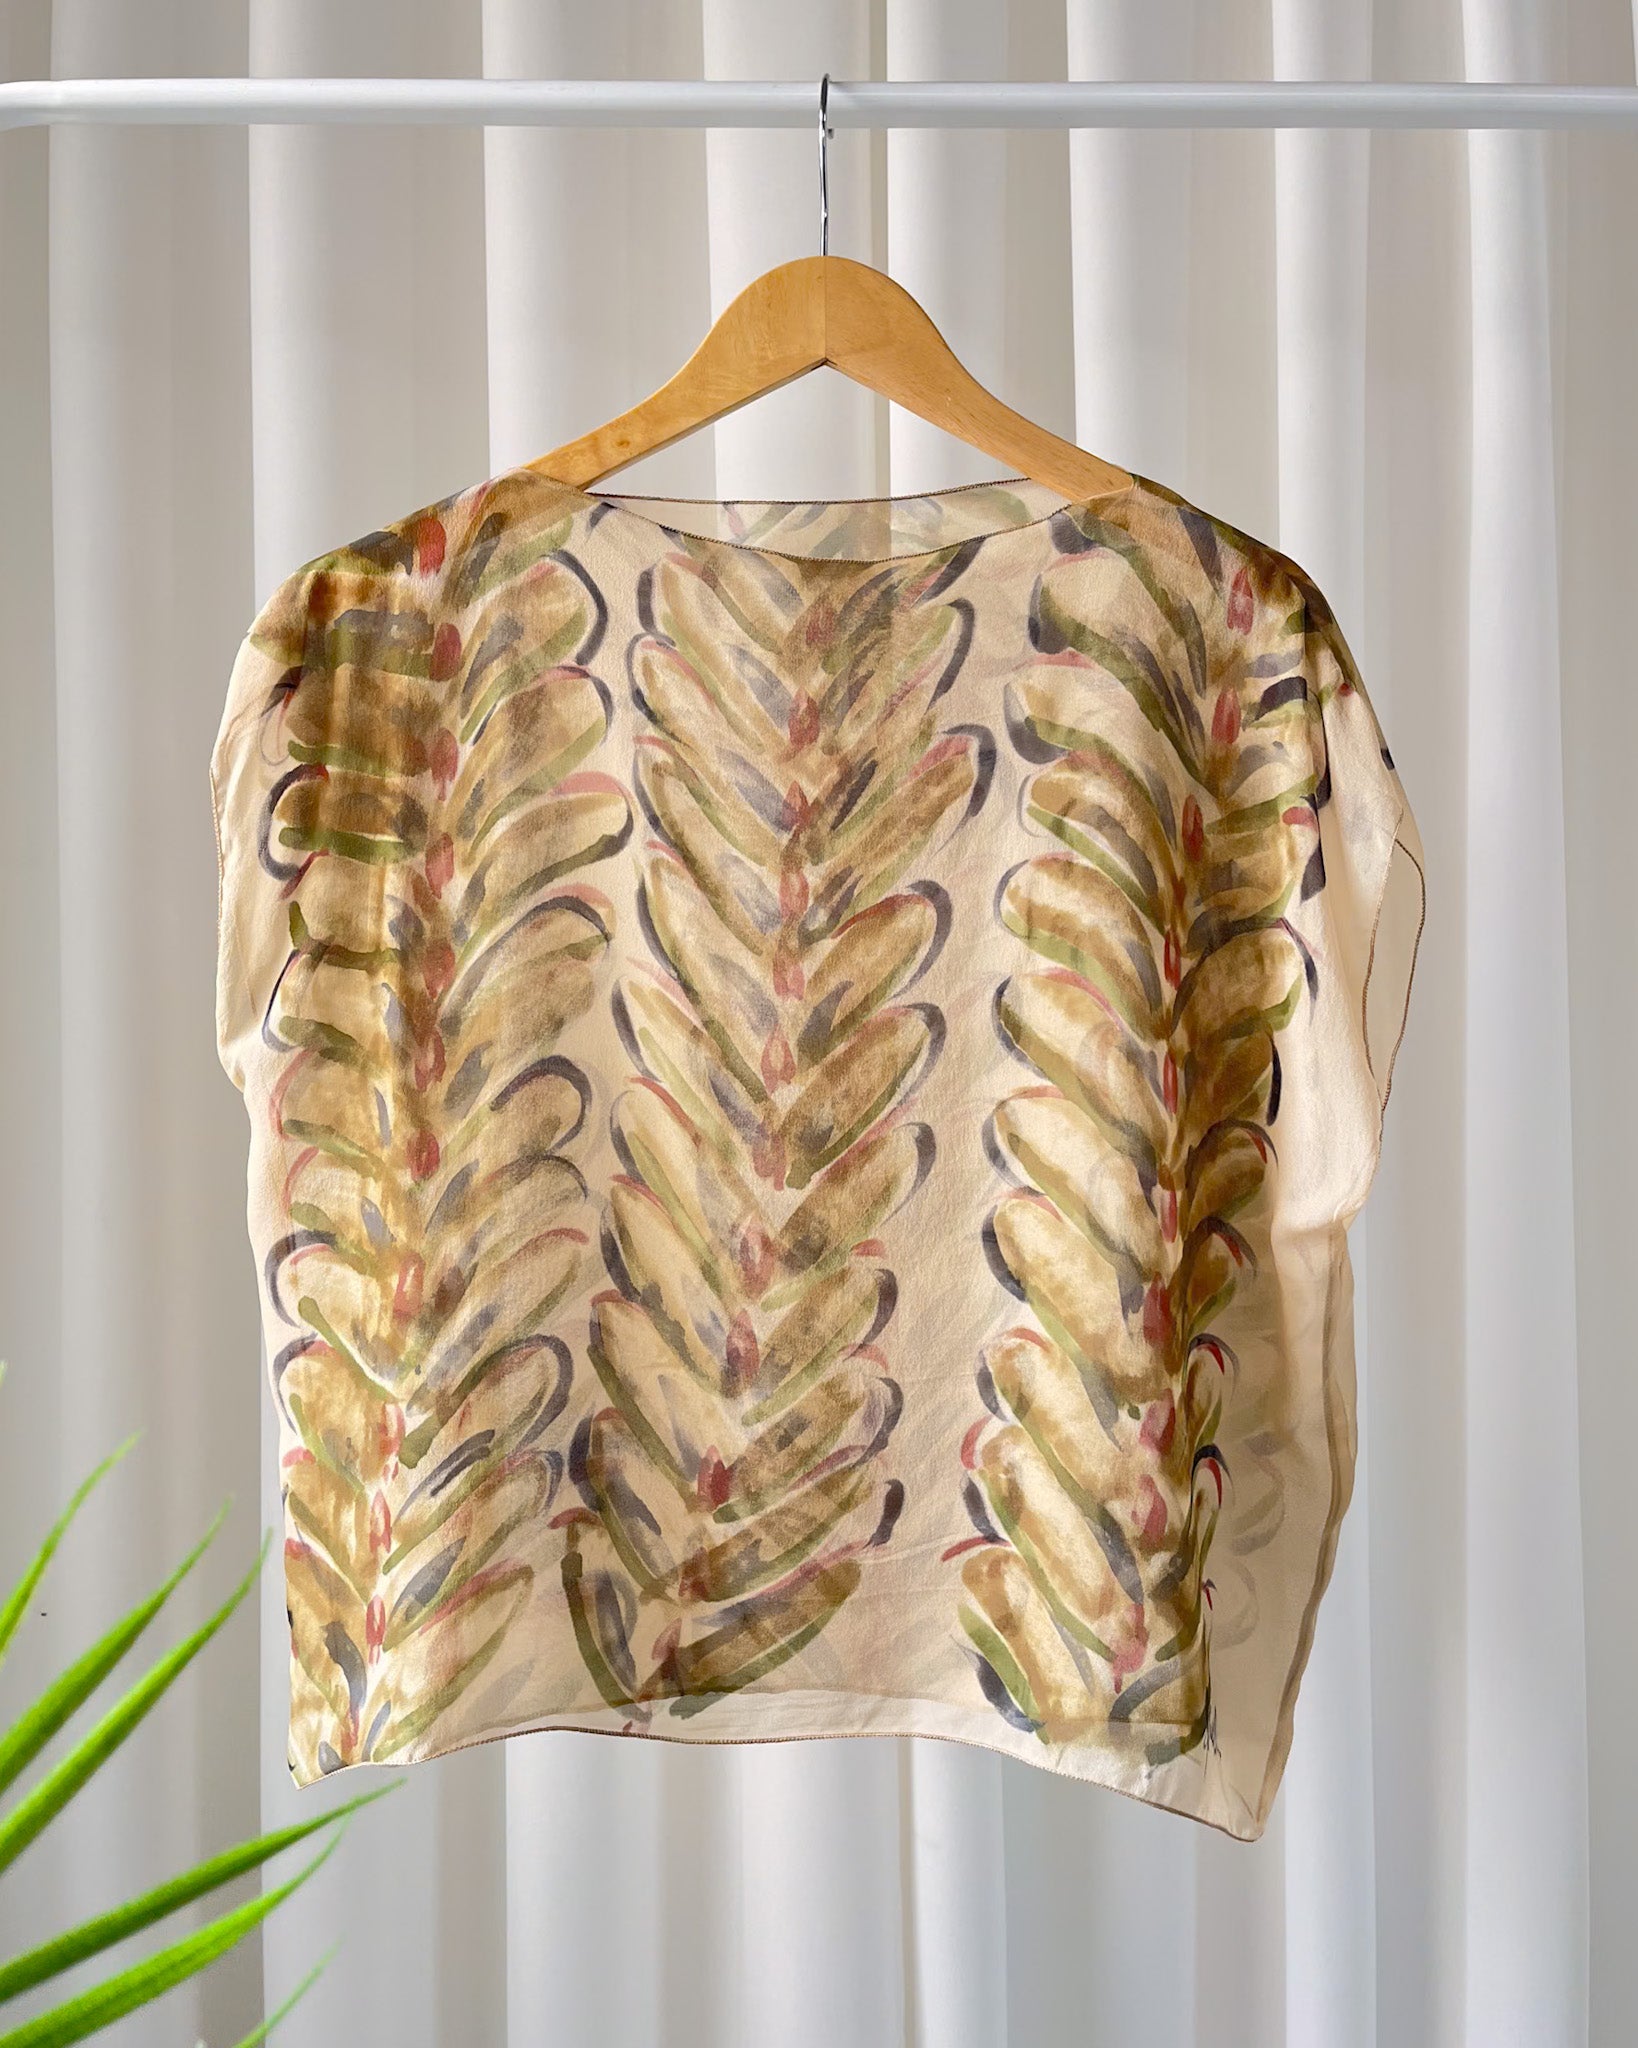 70s Hand Painted Silk Top